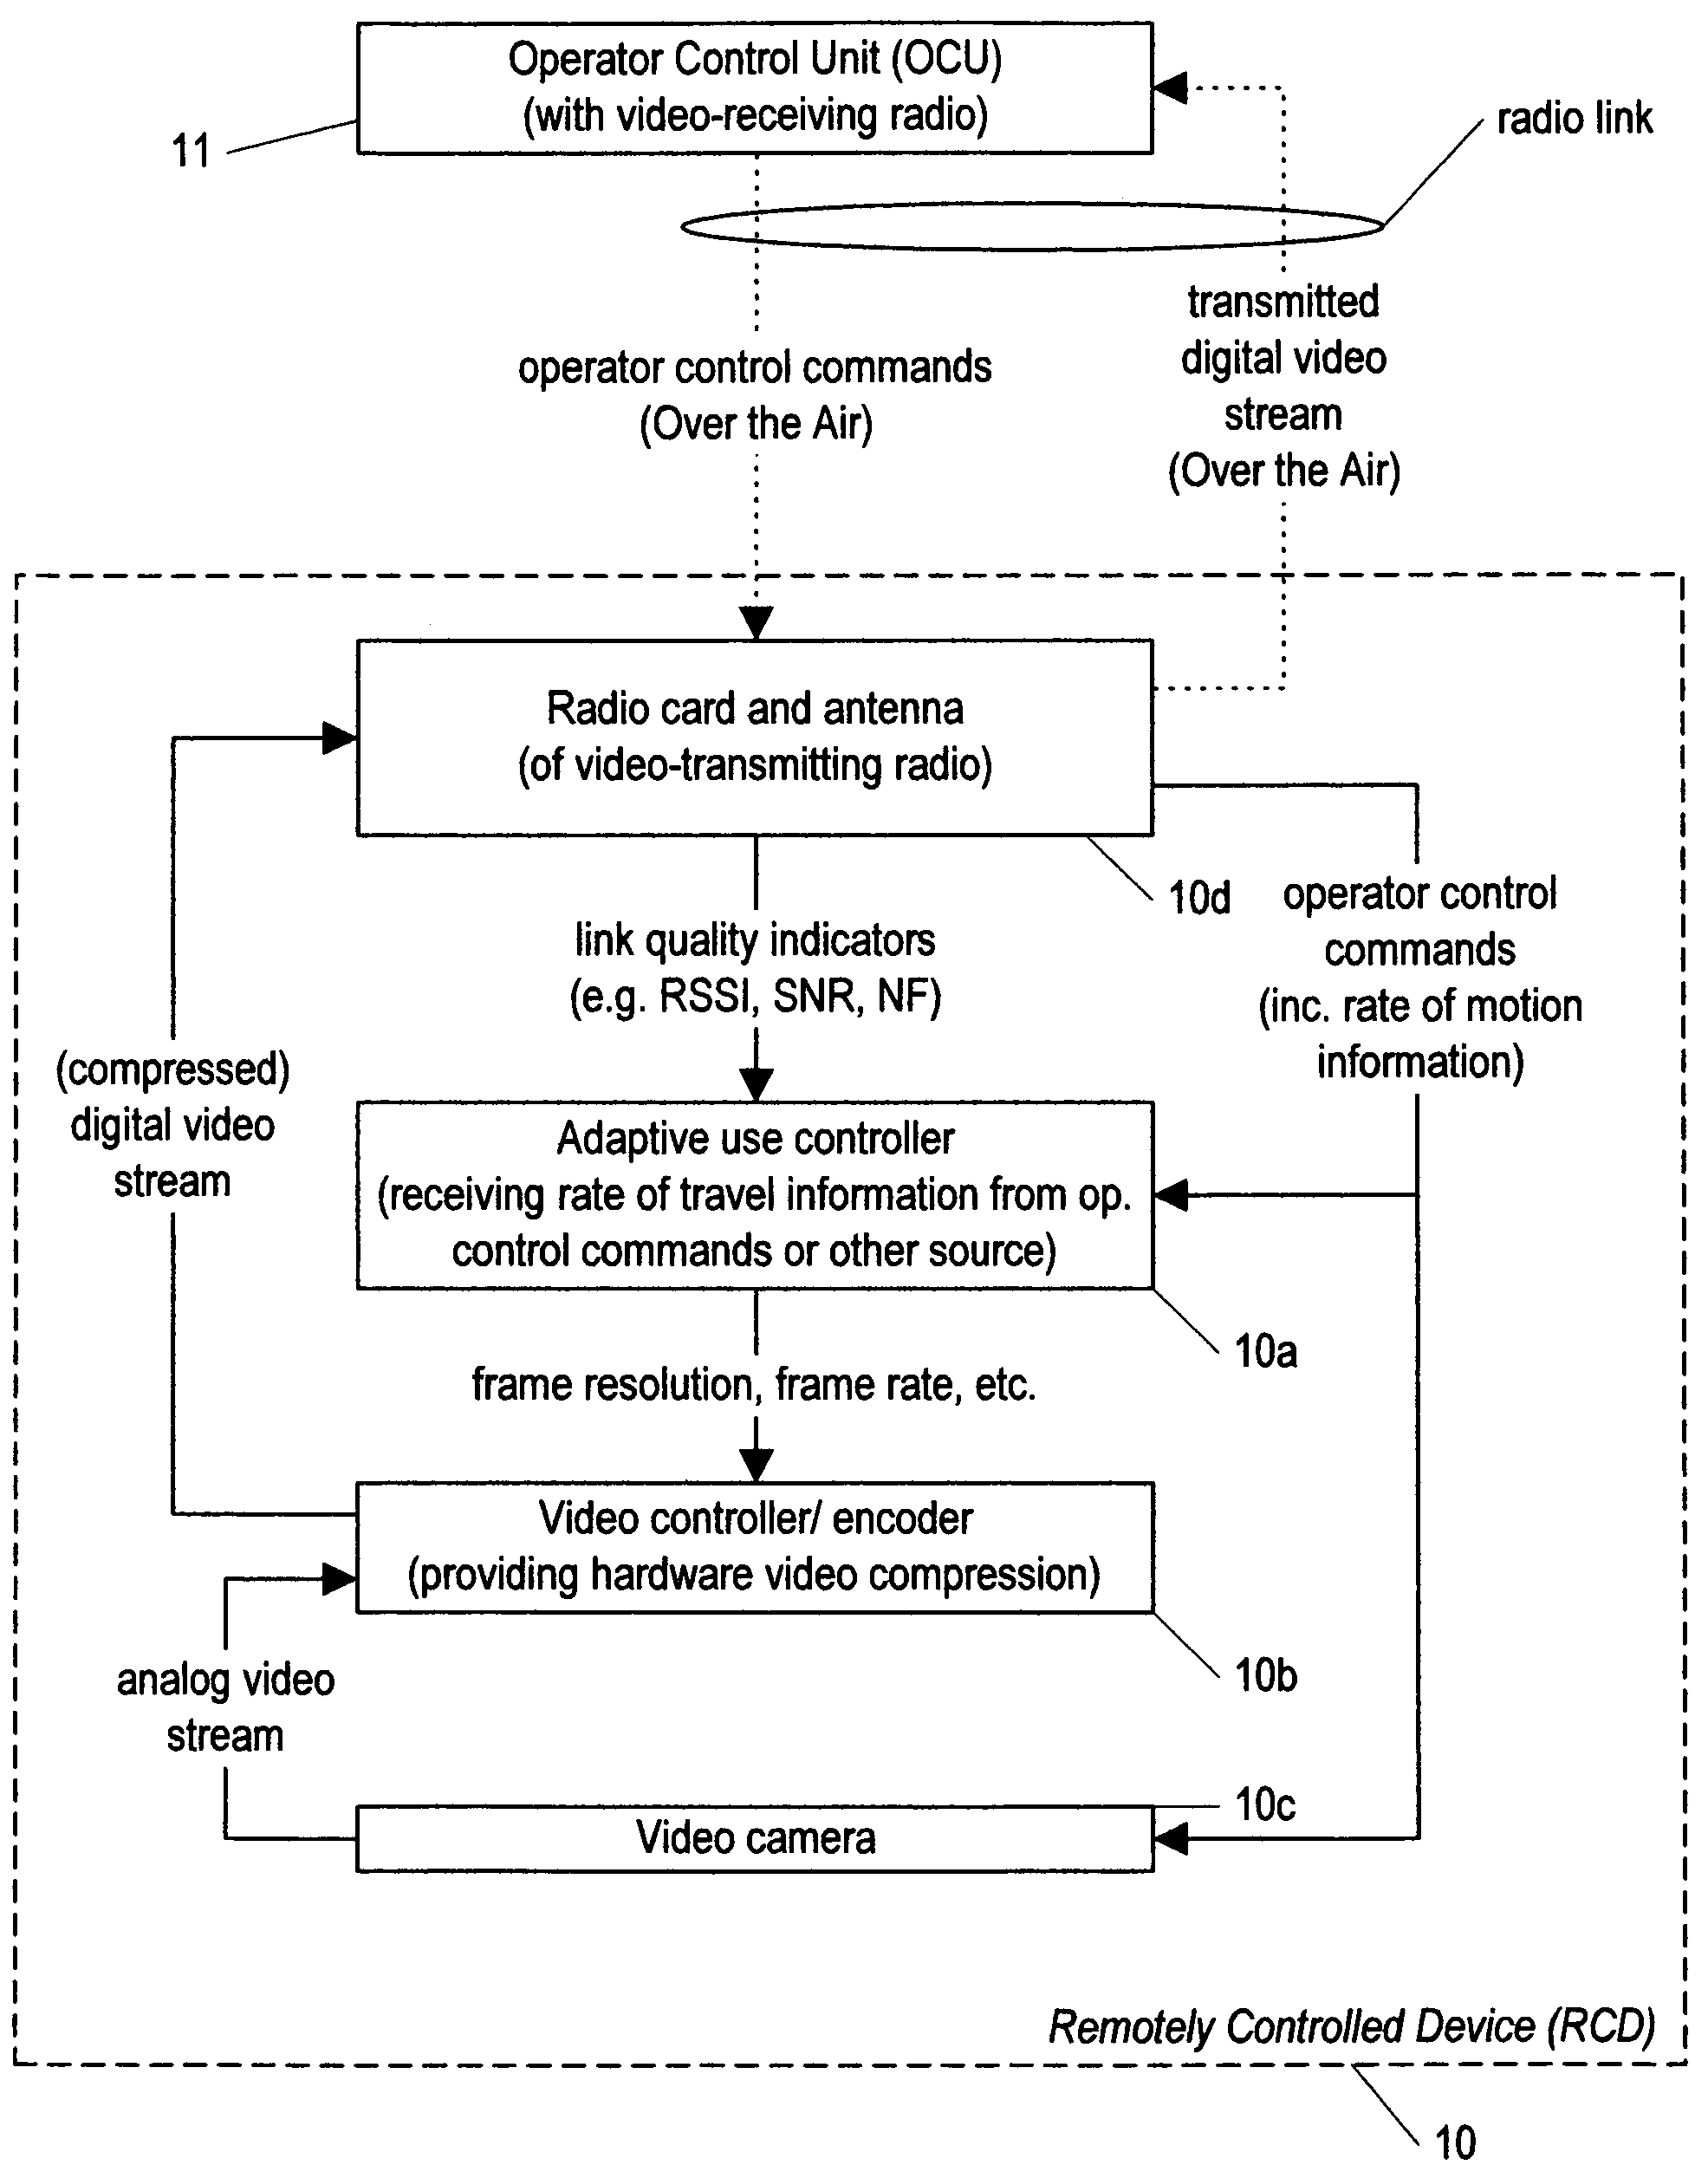 Method and system for adapting use of a radio link between a remotely controlled device and an operator control unit